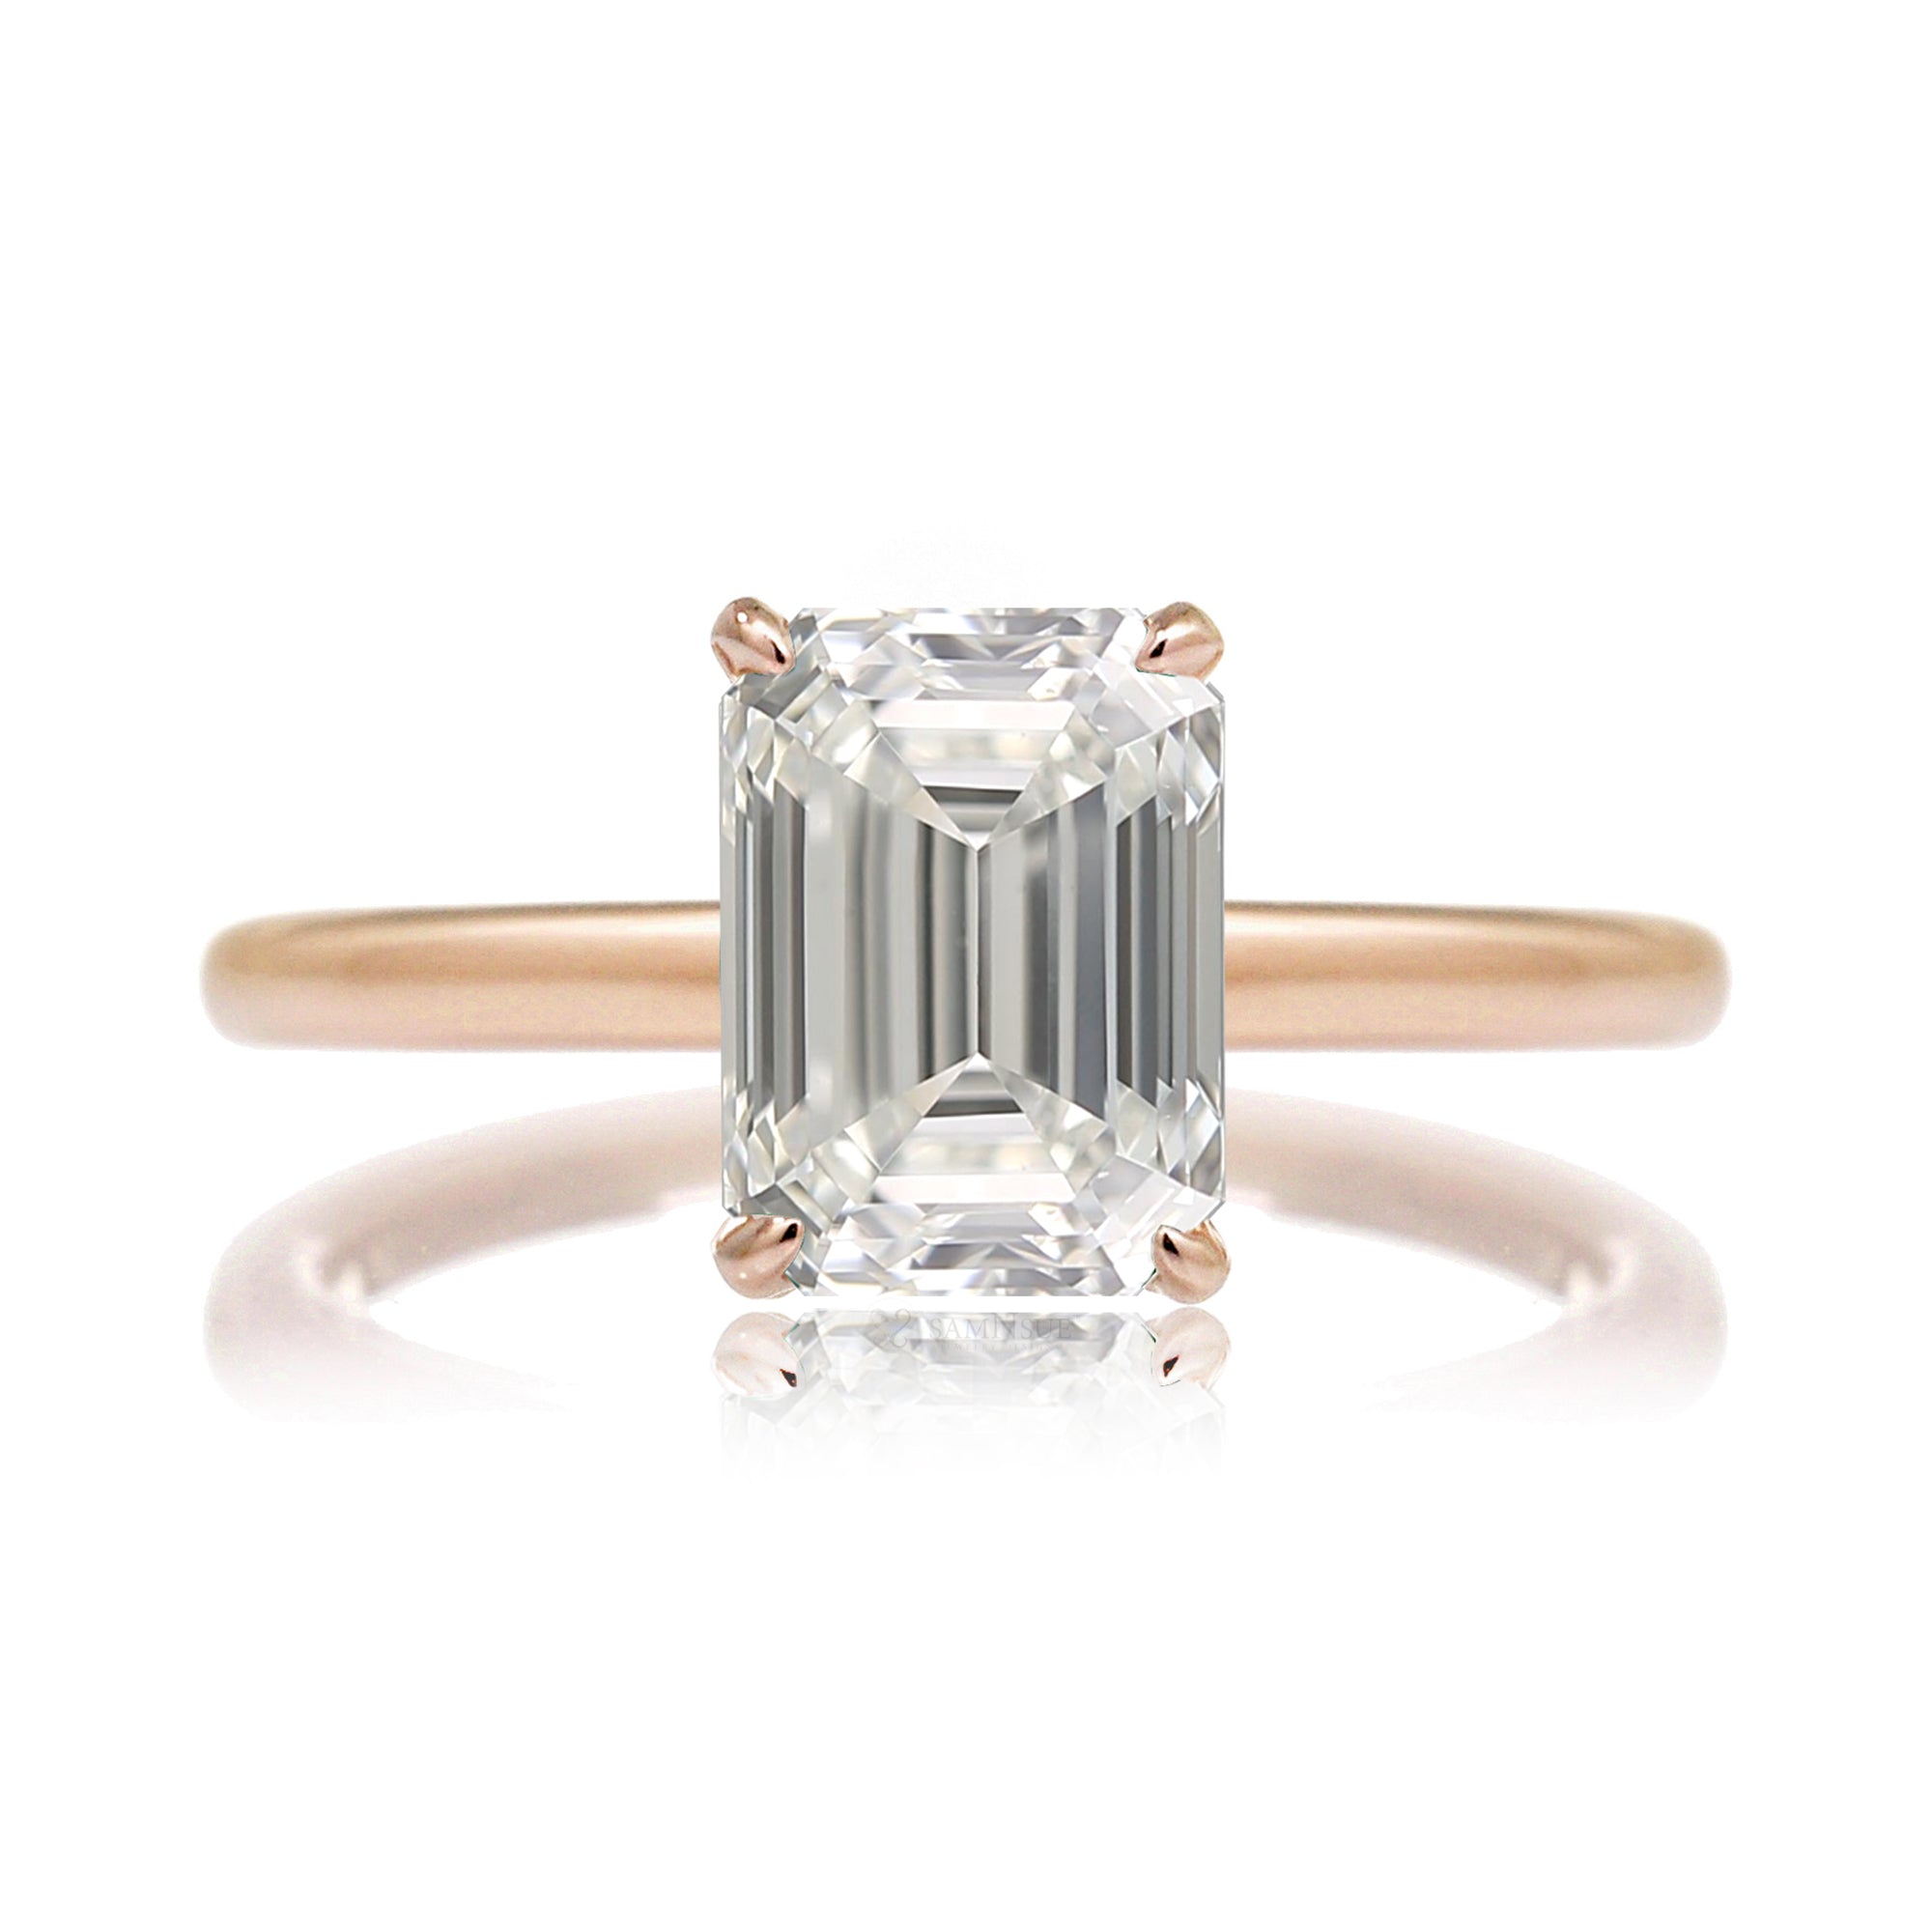 Emerald Step cut solitaire engagement ring diamond hidden halo solid band in rose gold